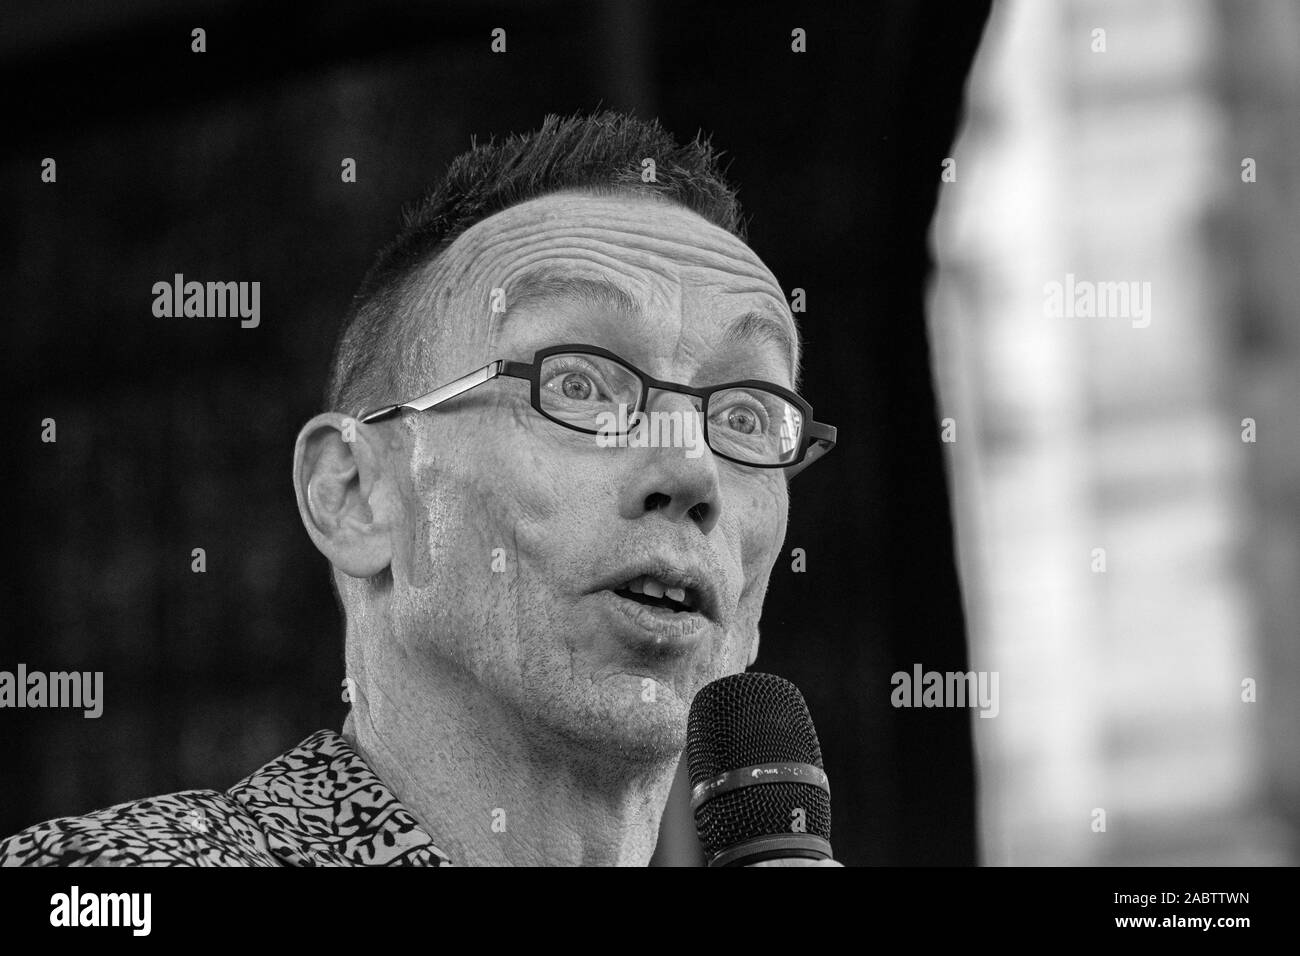 Close Up Dolf Jansen At The Edcuation Public Demonstration On The Dam Square Amsterdam The Netherlands 2019 In Black And White Stock Photo